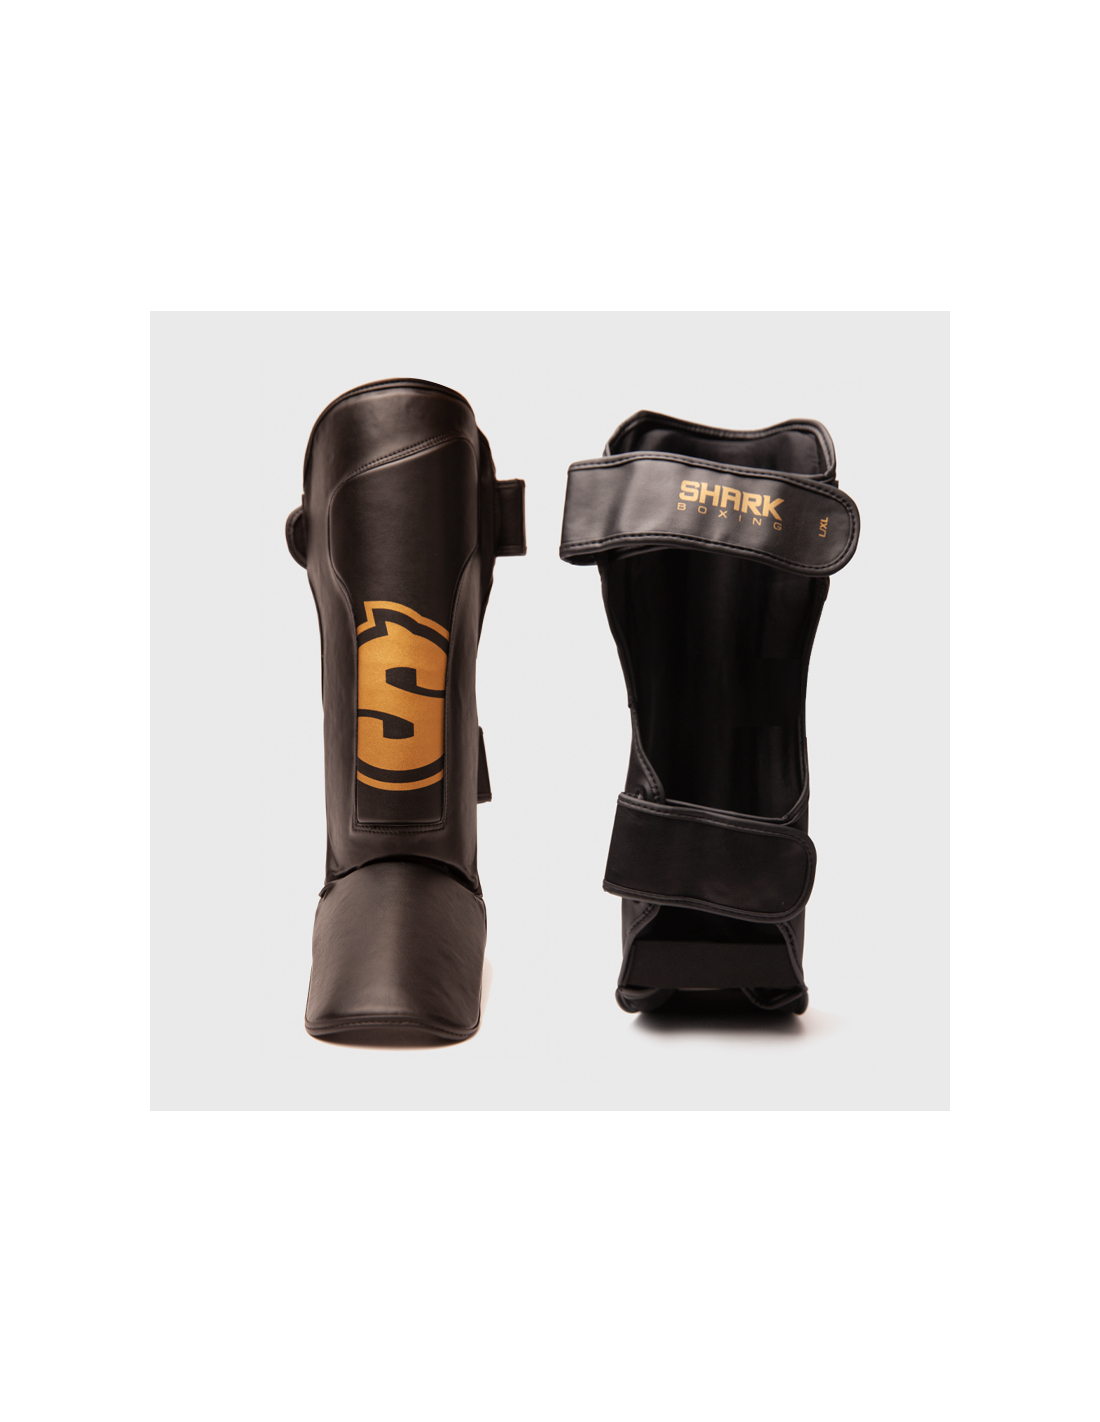 Protège-tibia boxe - Taille S/M - Noirs